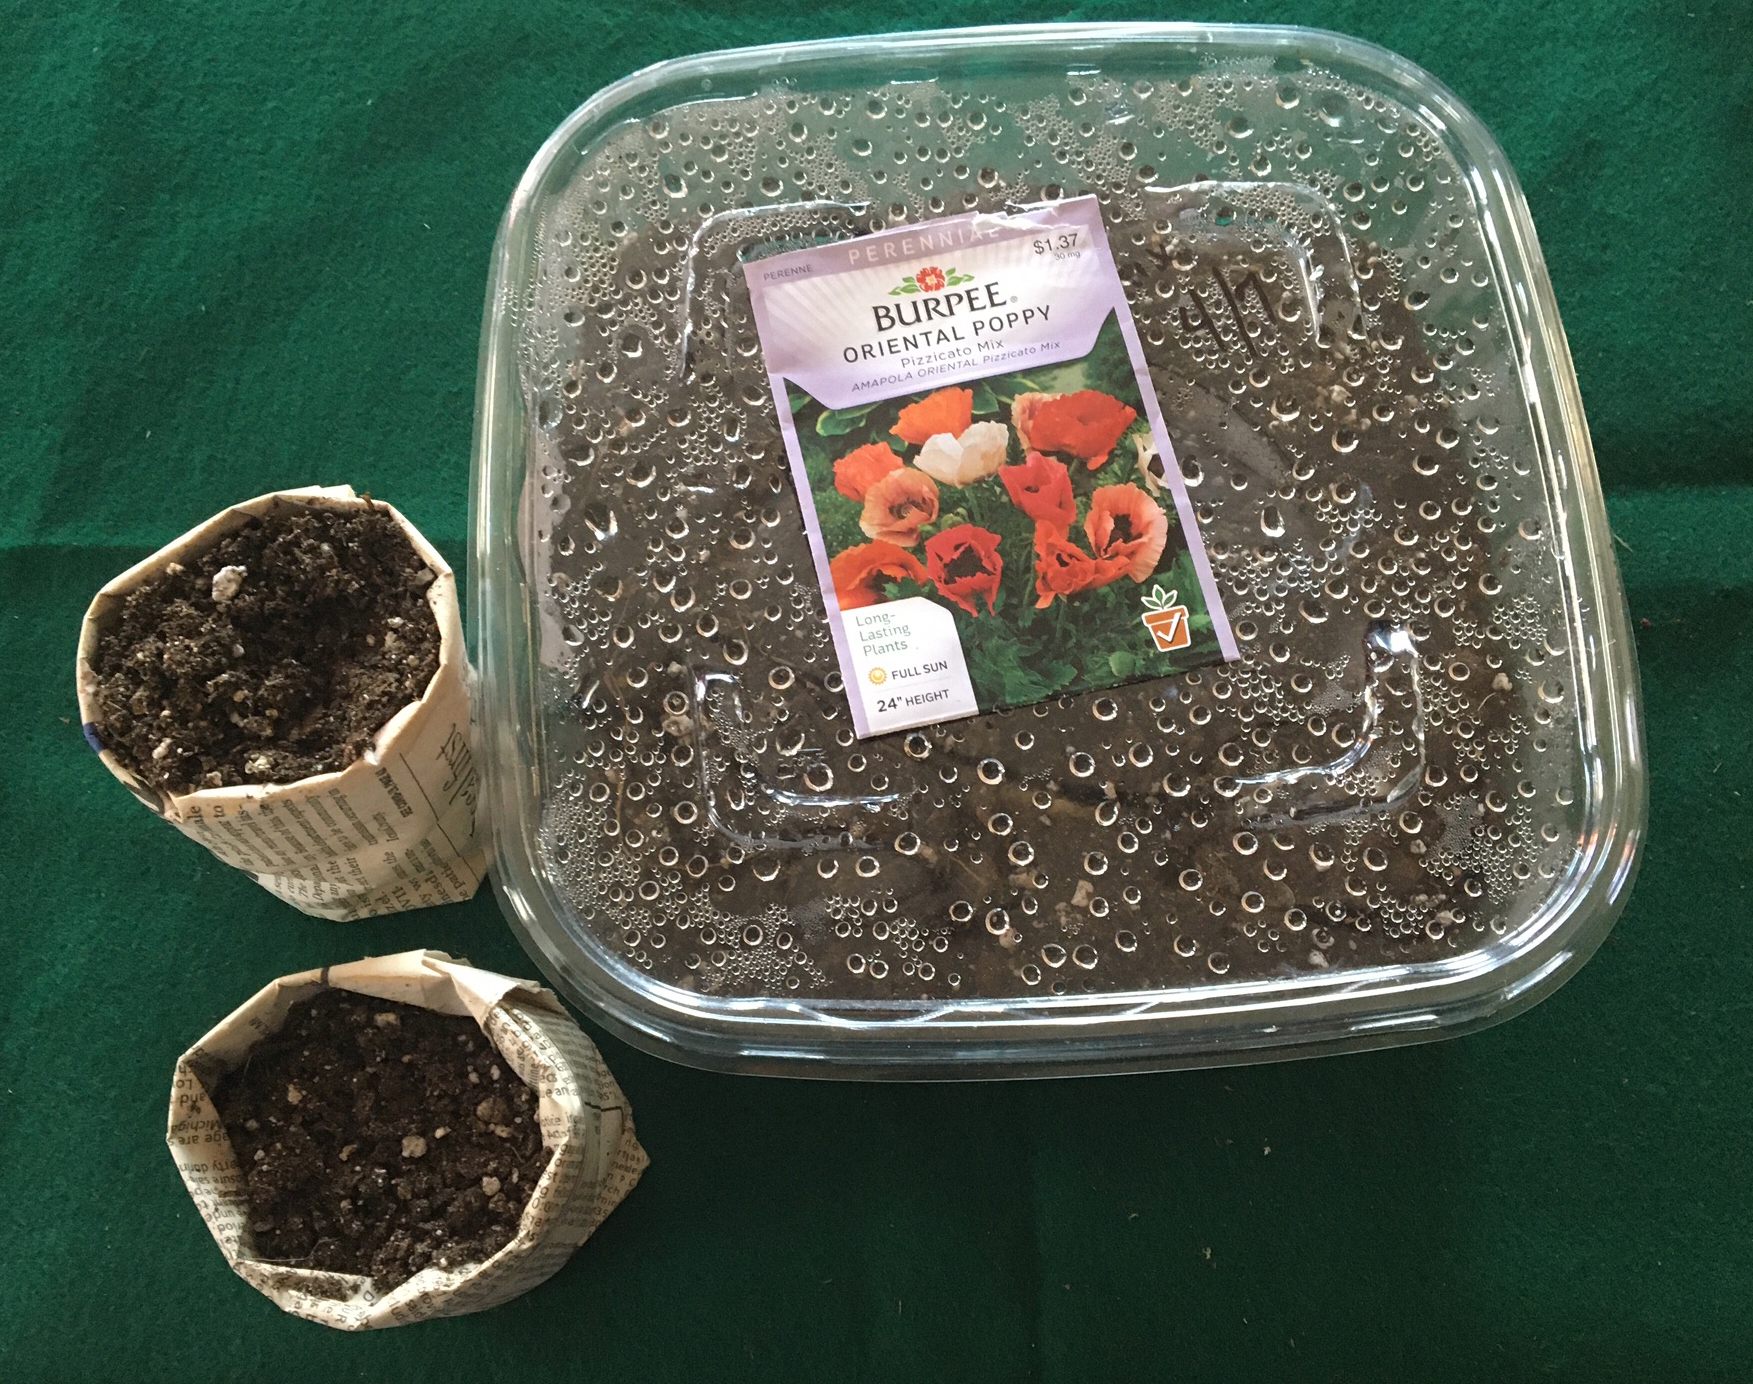 Seed beds in household items